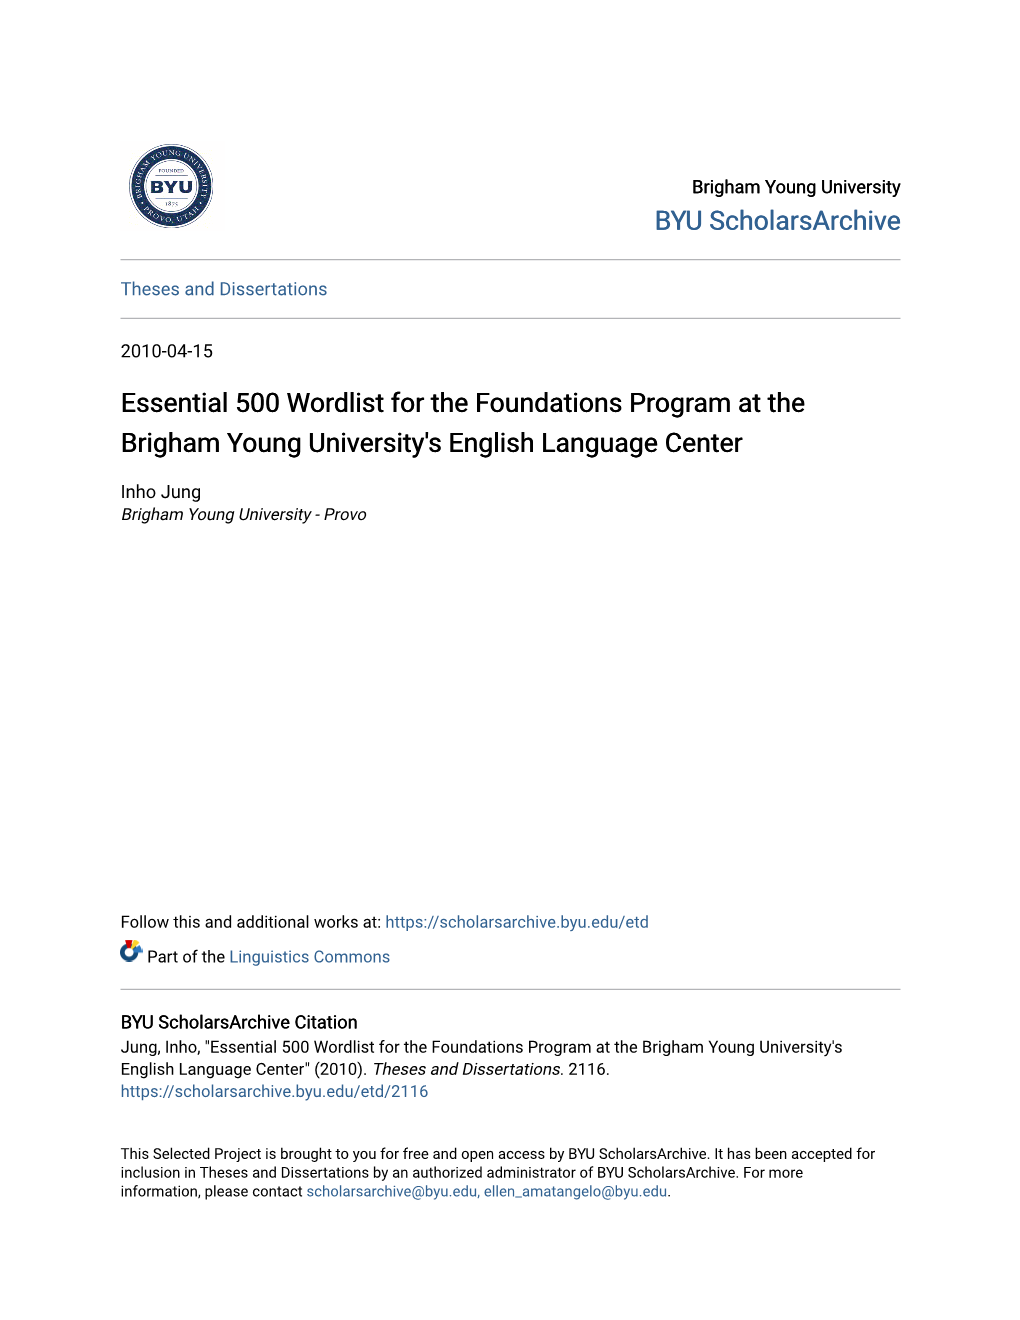 Essential 500 Wordlist for the Foundations Program at the Brigham Young University's English Language Center